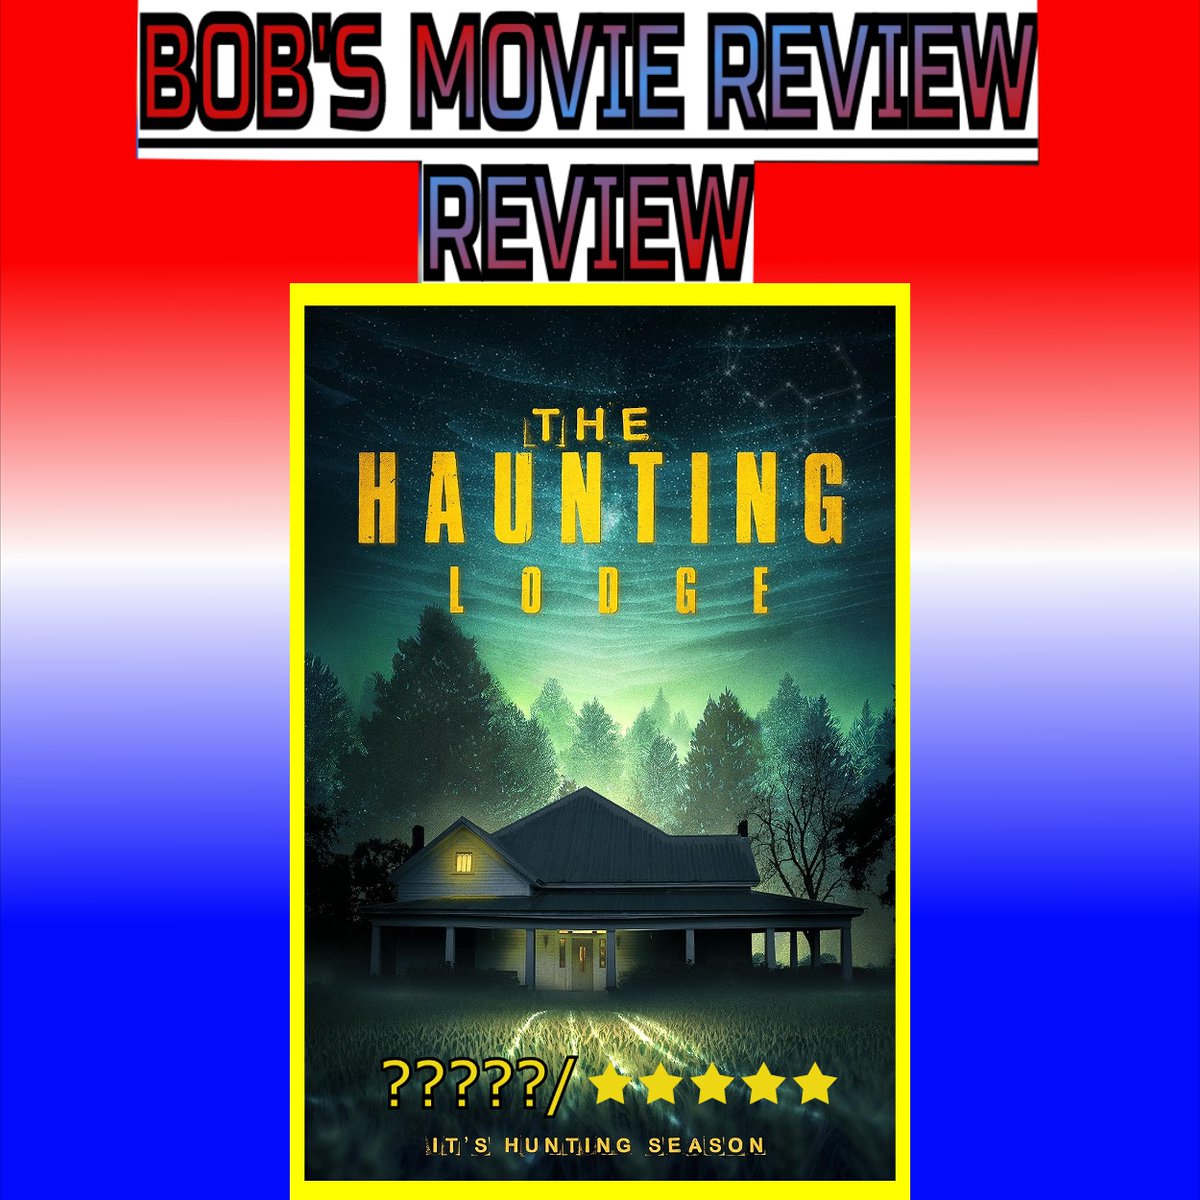 New Release Review smpl.is/7yuns
The Haunting Lodge
Buy! smpl.is/7yunt
Releasing 10/17/23 from Gravitas Ventures @gravitasvod 
#thehauntinglodge #movie #review #gravitasventures